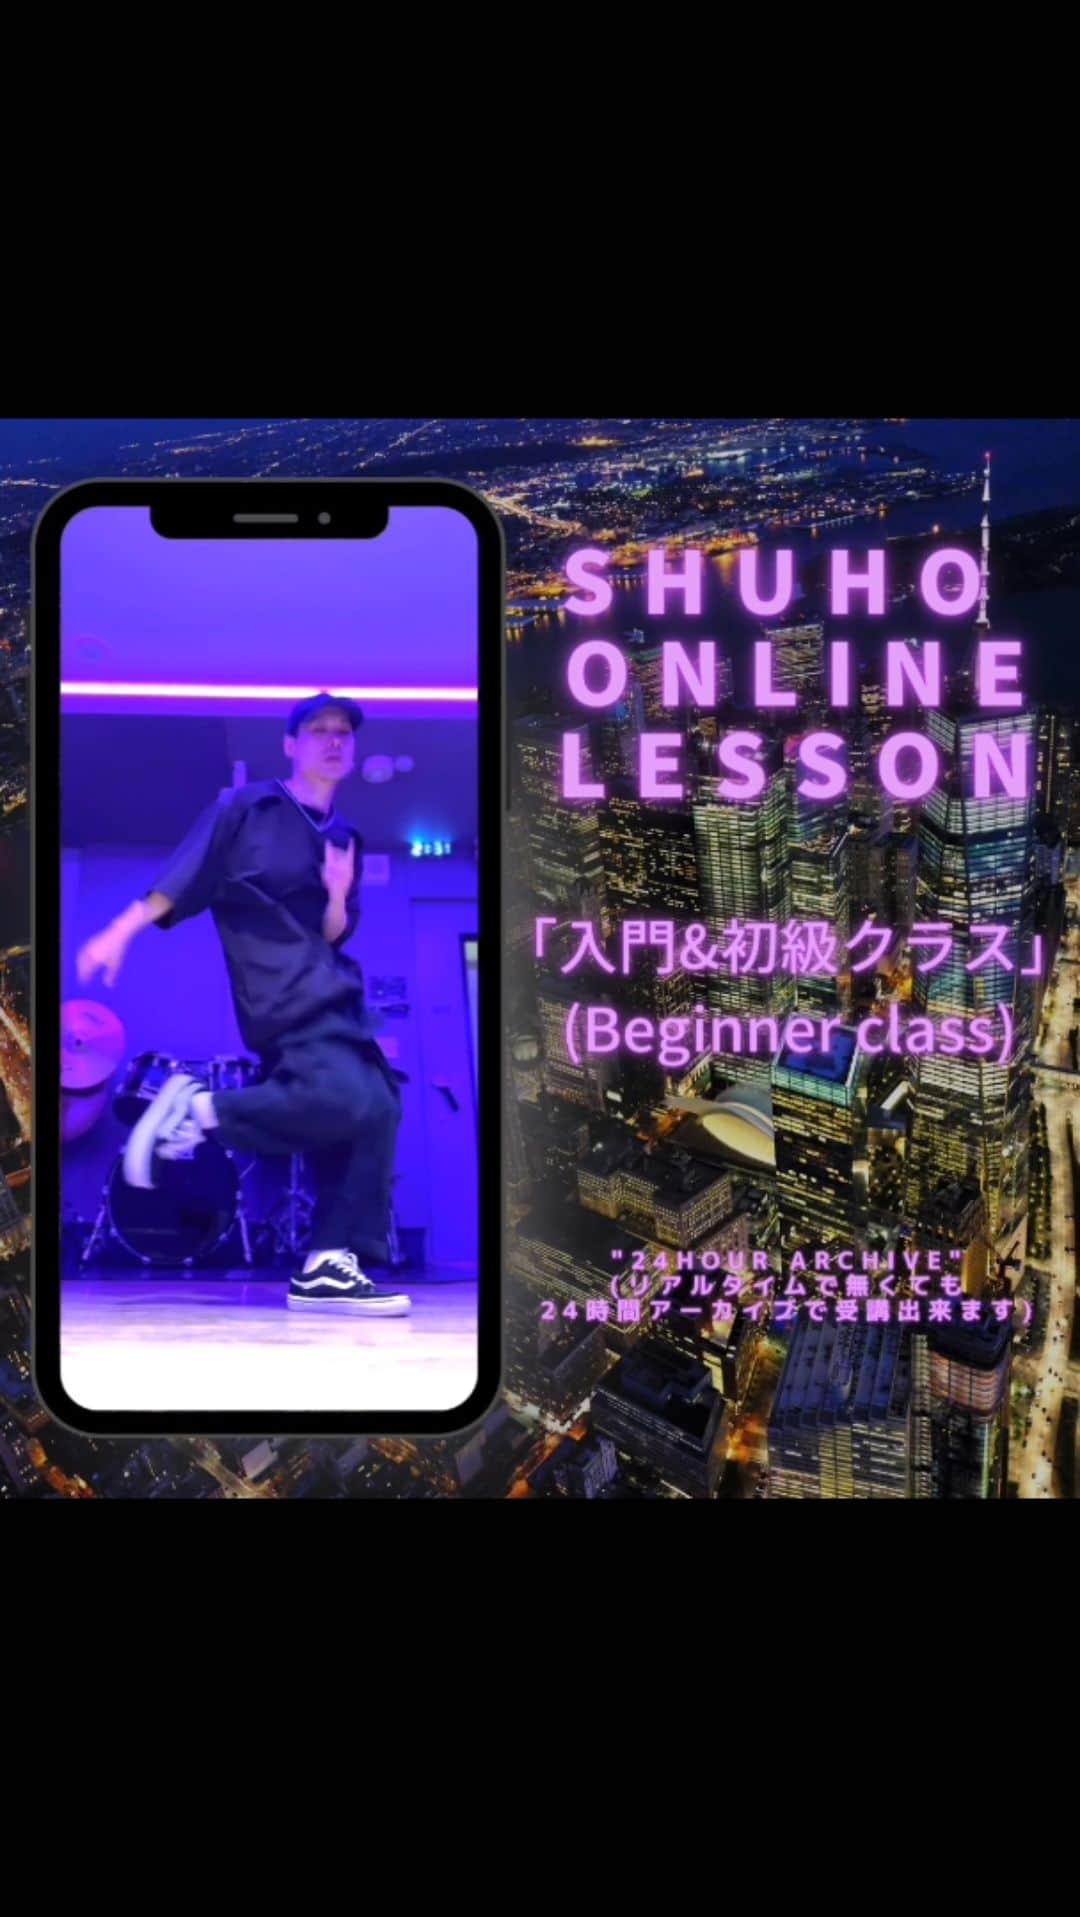 SHUHOのインスタグラム：「ONLINE CLASS INFO ☆6/17(SAT)  HOUSE DANCE BEGINNER 19:30〜20:30(JPT)  ＊24hour archive リアルタイムで無くとも24時間受講可能です  申し込みは前日までにDMで🙏  DM me if you want to take the course from overseas. ("paypal" payment required)」